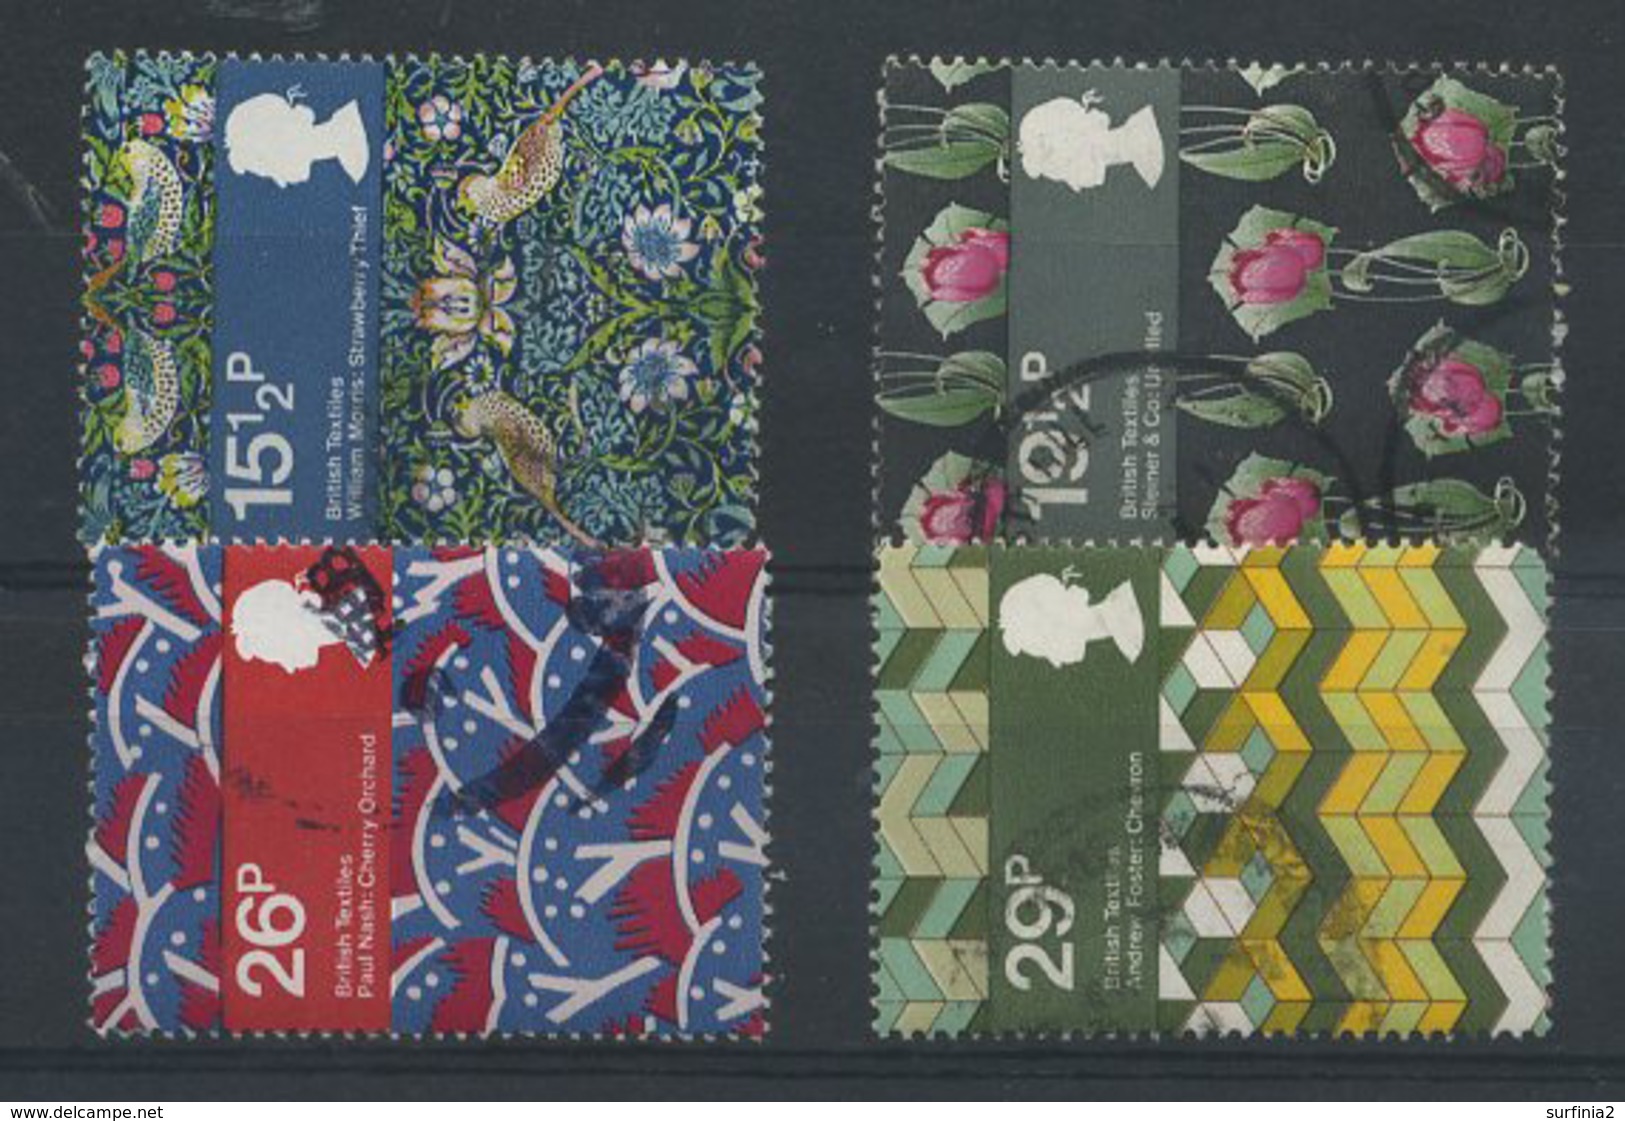 STAMPS - GREAT BRITAIN - 1982 TEXTILES SET - USED - Used Stamps